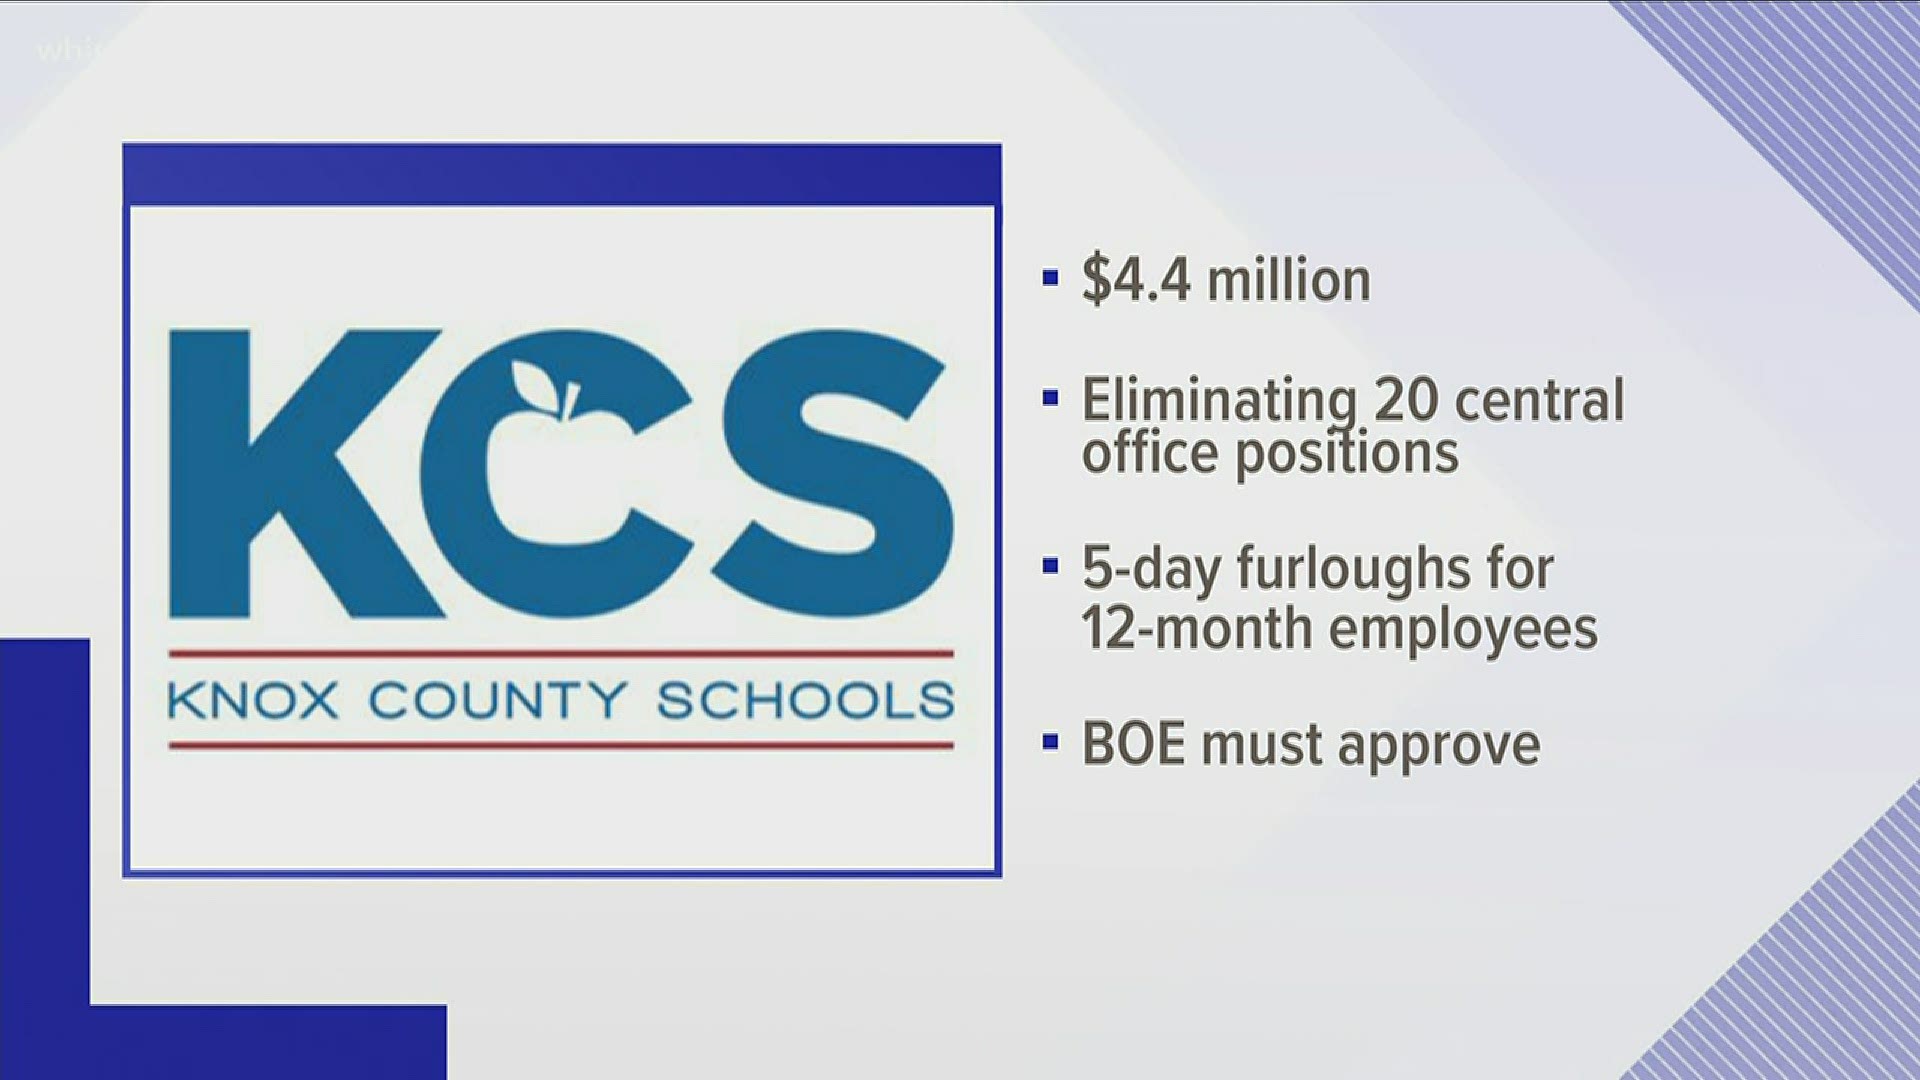 Knox County Schools is looking to cut $4.4 million from the upcoming fiscal year budget.